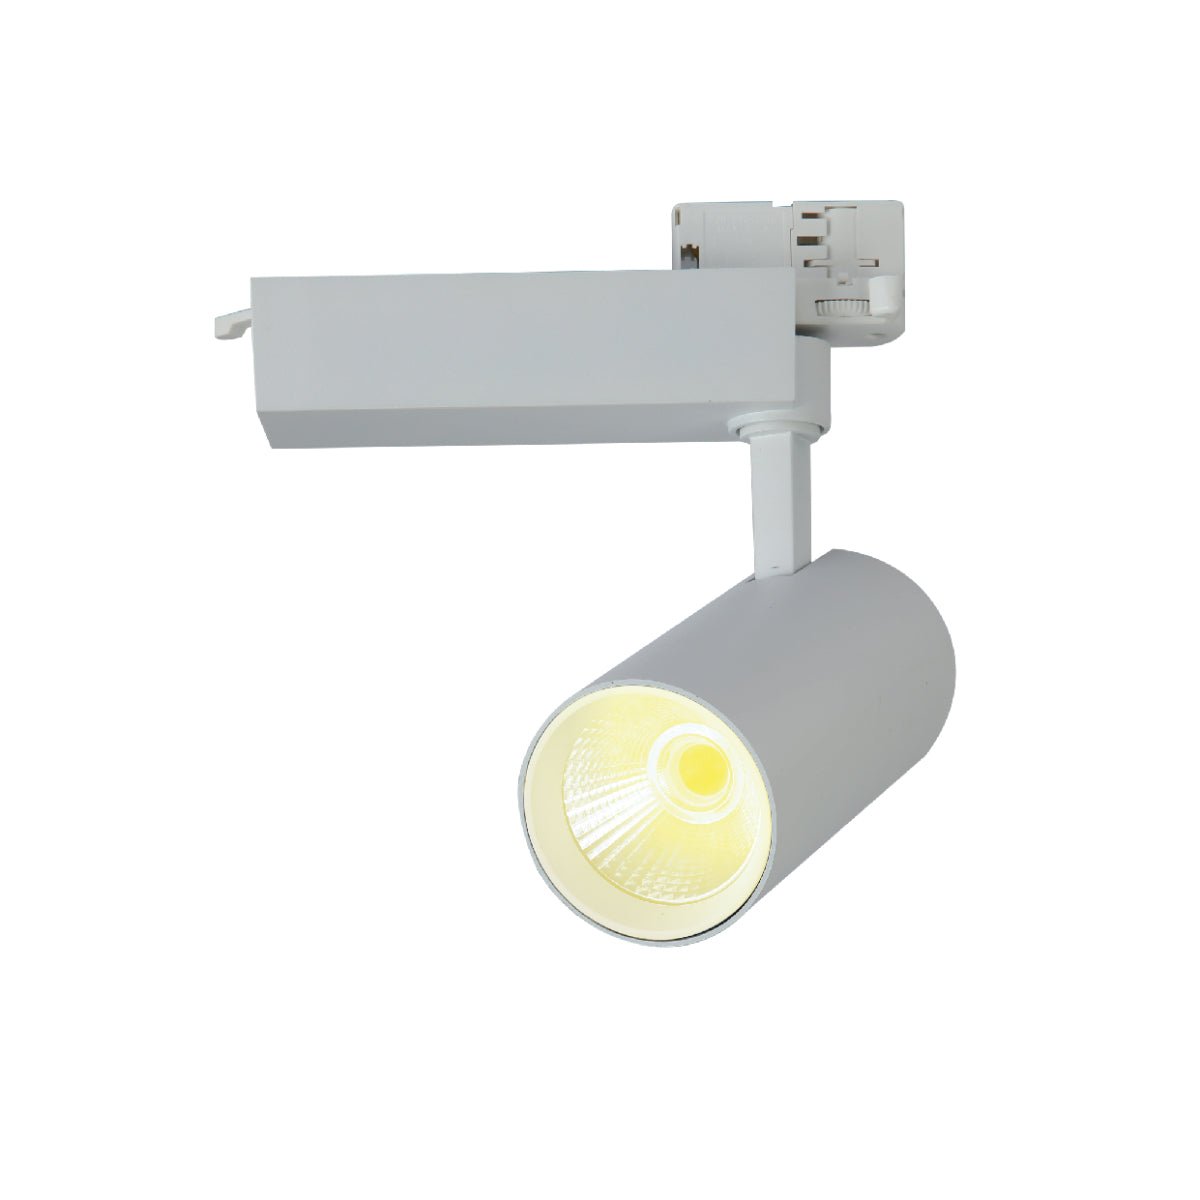 Main image of Tracklight 5-wire 3-Line 30W Cool White 4000K White Body | TEKLED 174-039902